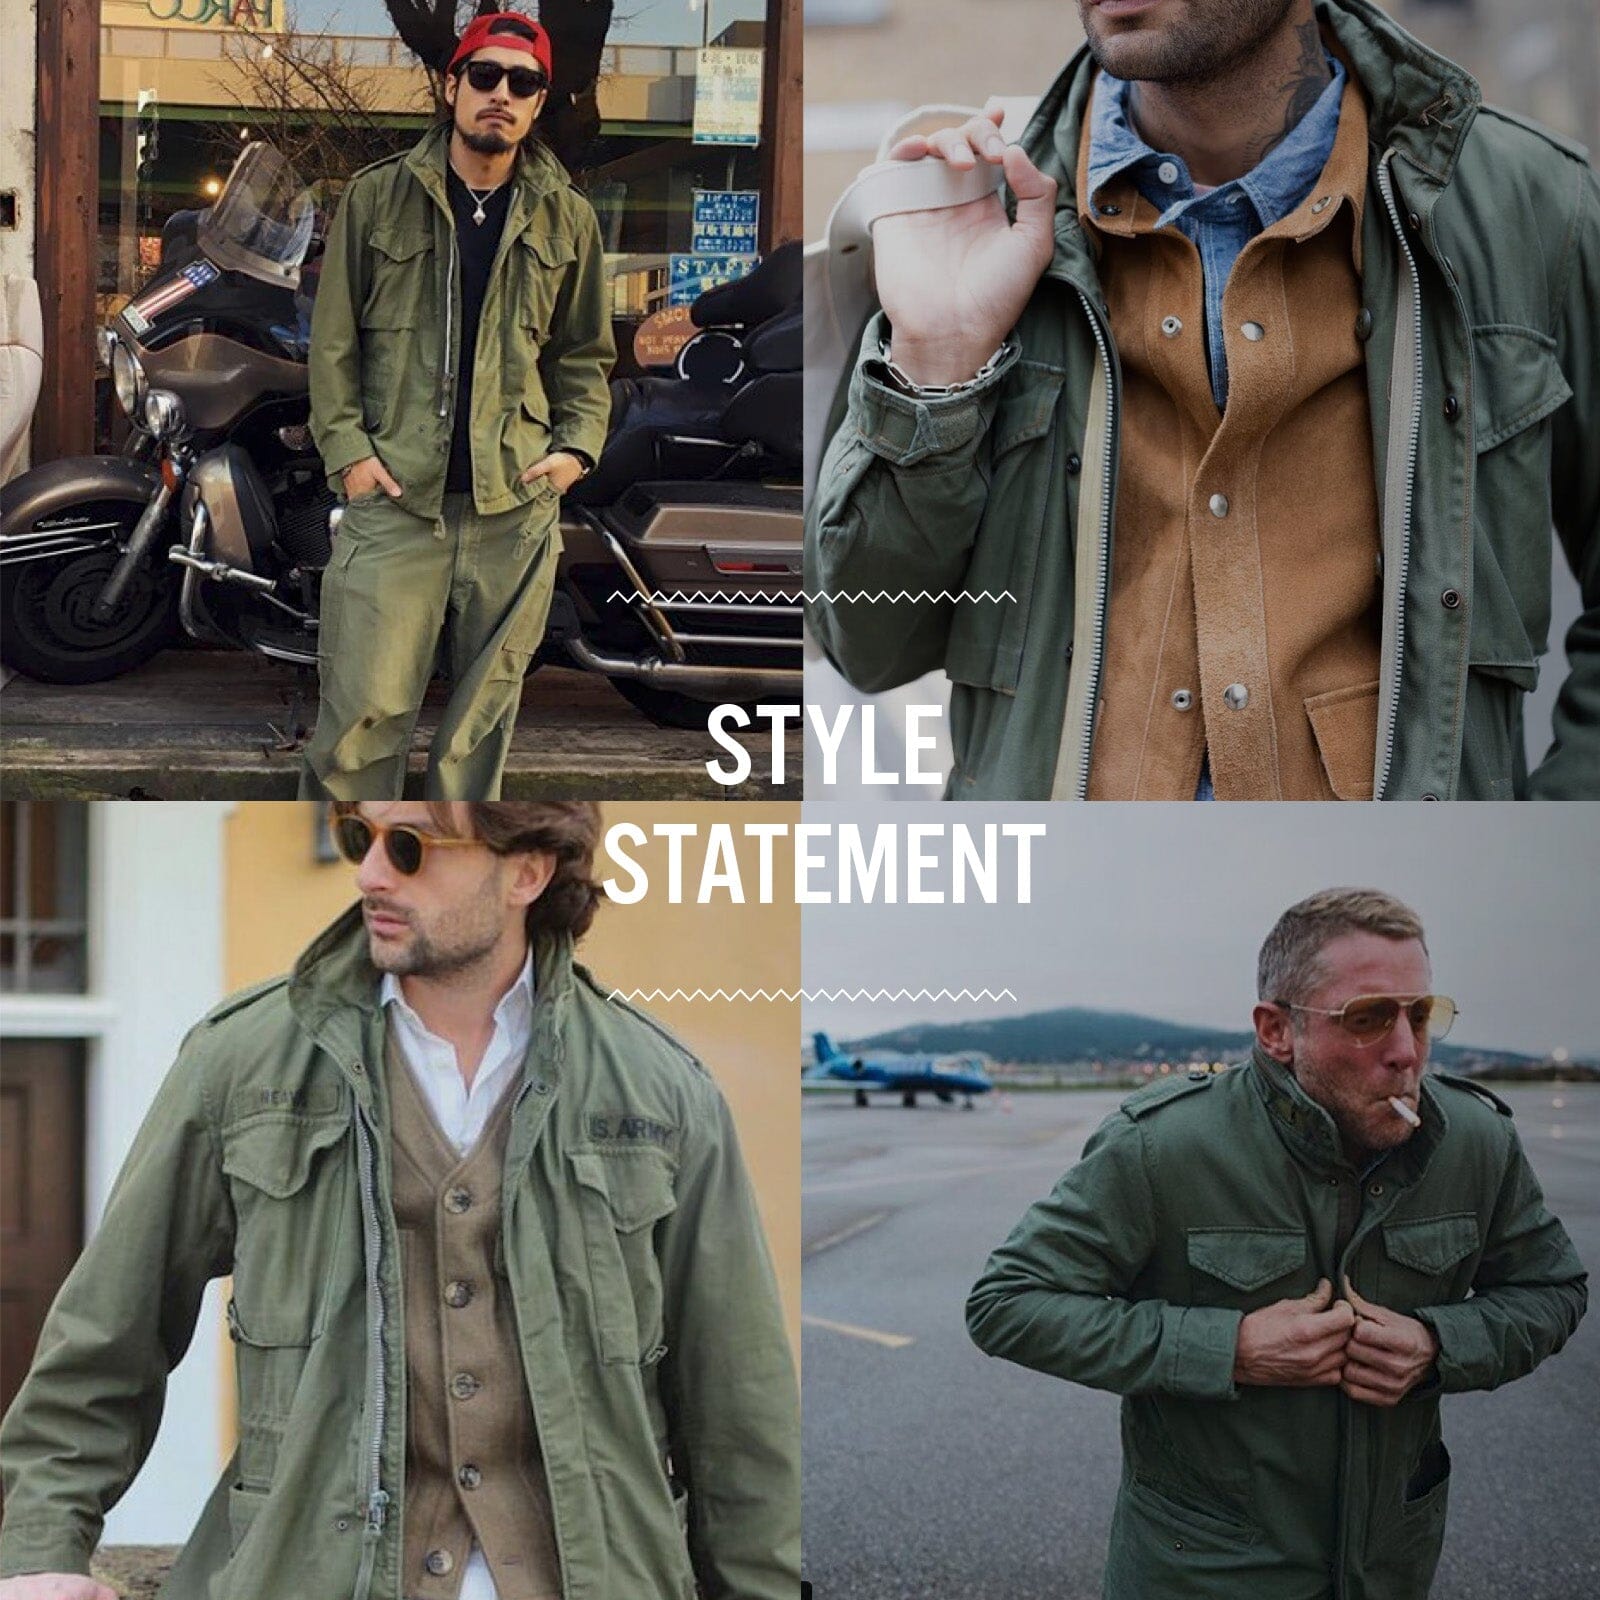 The M-65 Field Jacket - truly A universal statement style